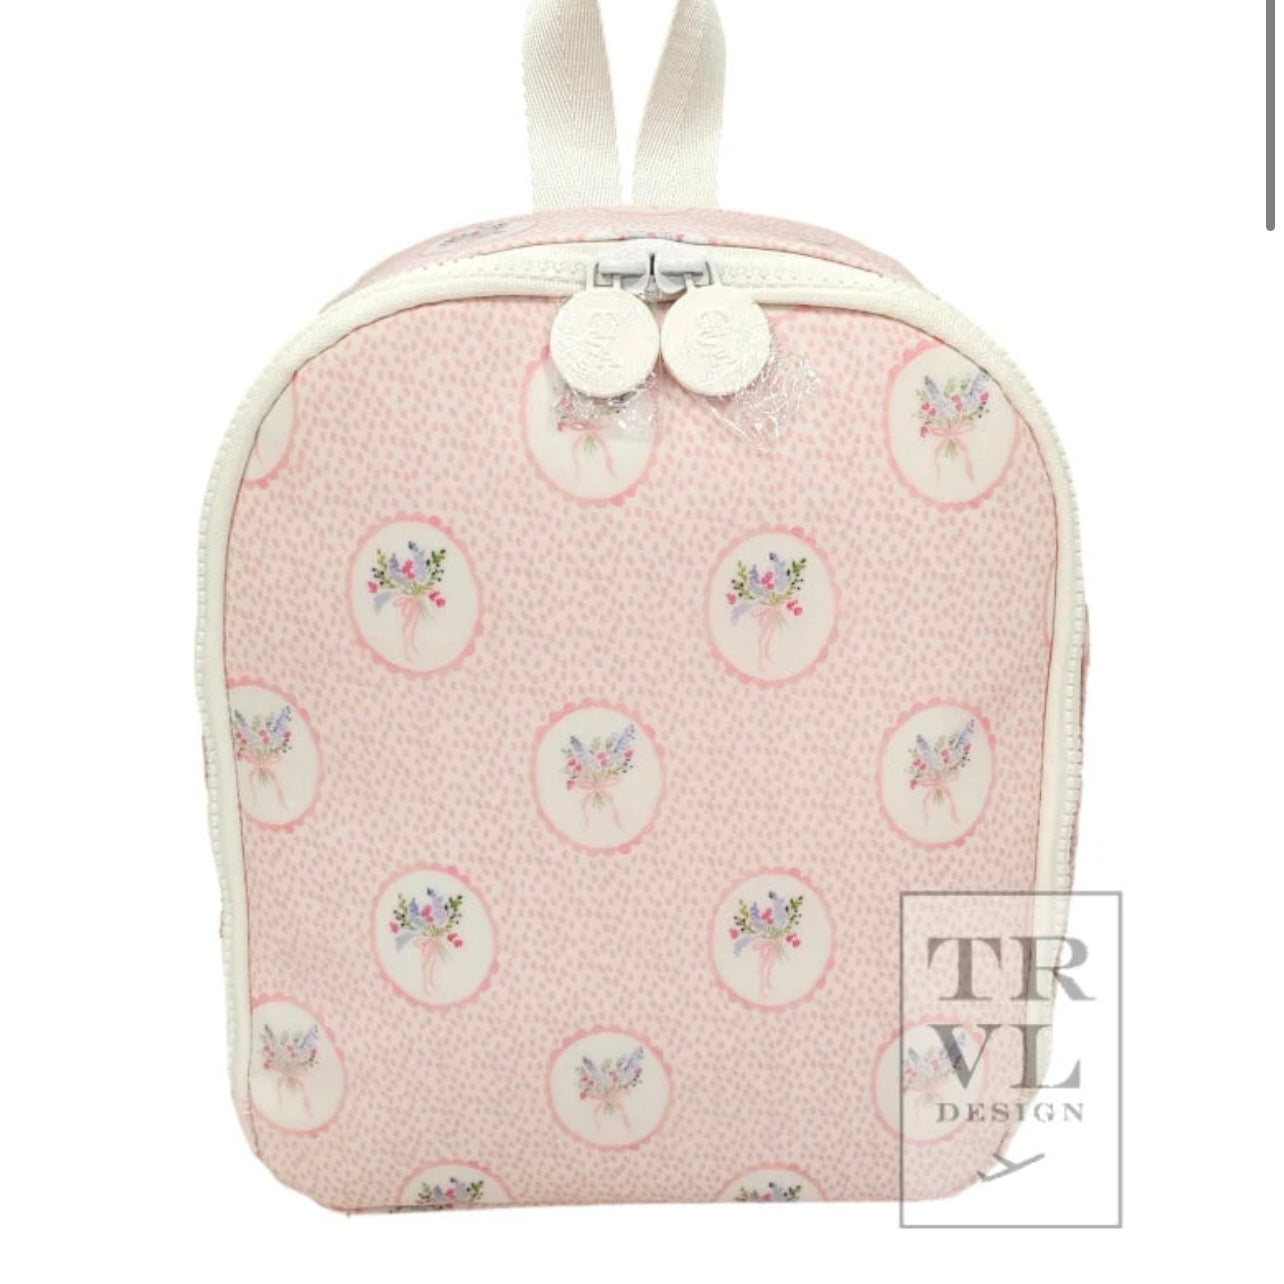 Bring It Lunch Tote - Medallion Pink